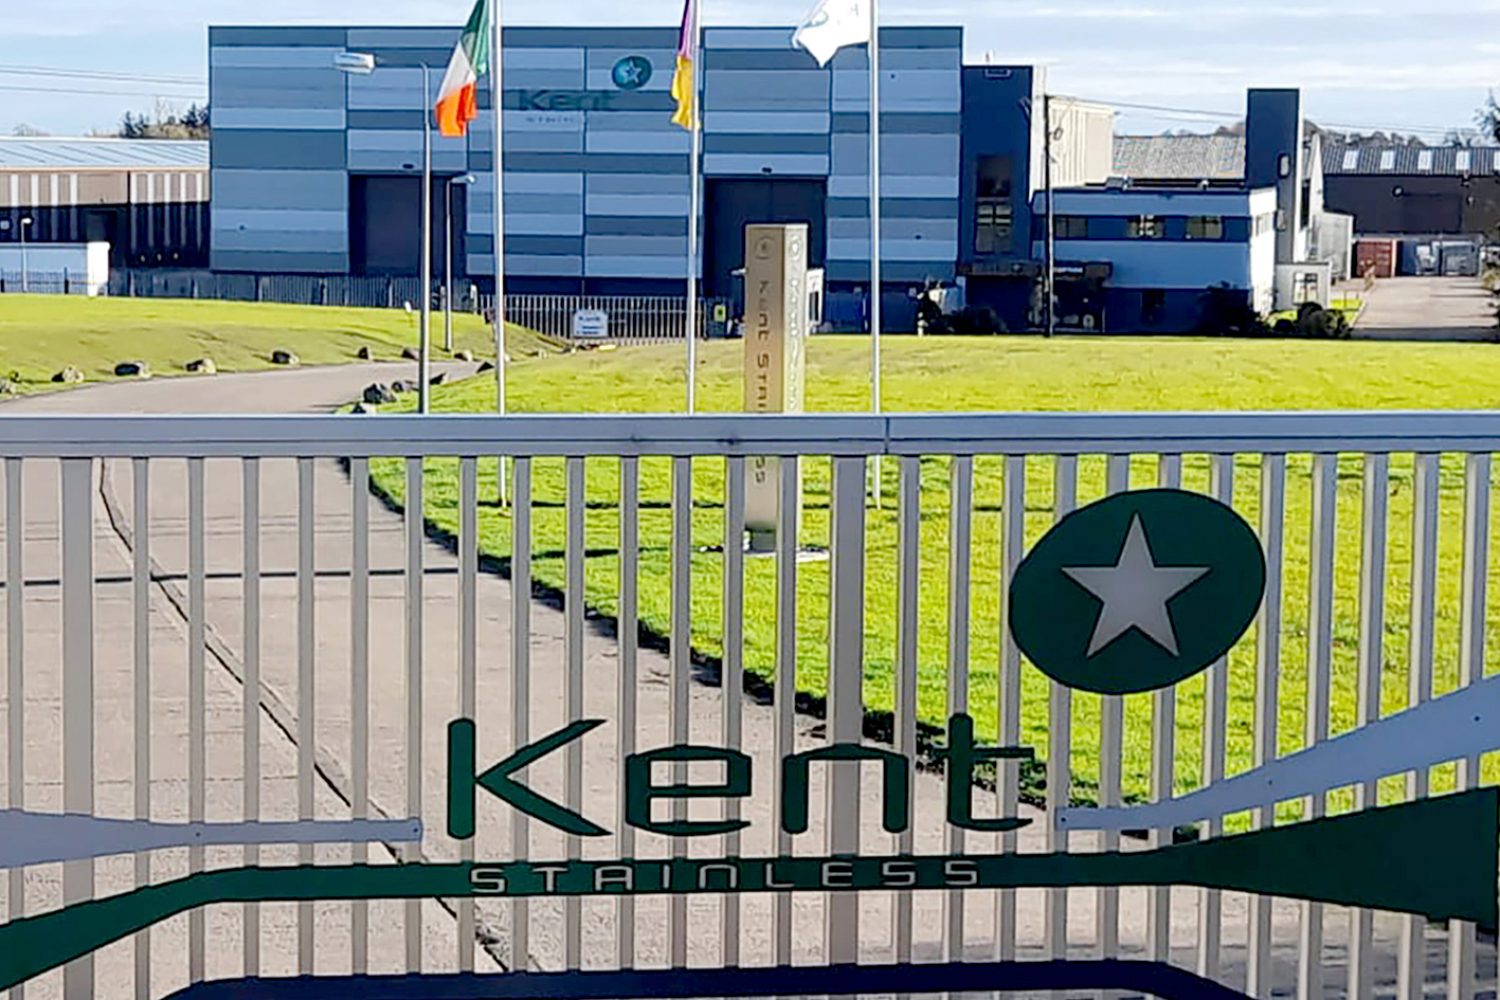 Kents Stainless, Ardcavan, Wexford

Photograph by Jim Campbell Photography (Wexford)
Phone: 00353 (0)87 343 4932
Web: https://warlens.co.uk/
email : campbell.pressfoto@gmail.com